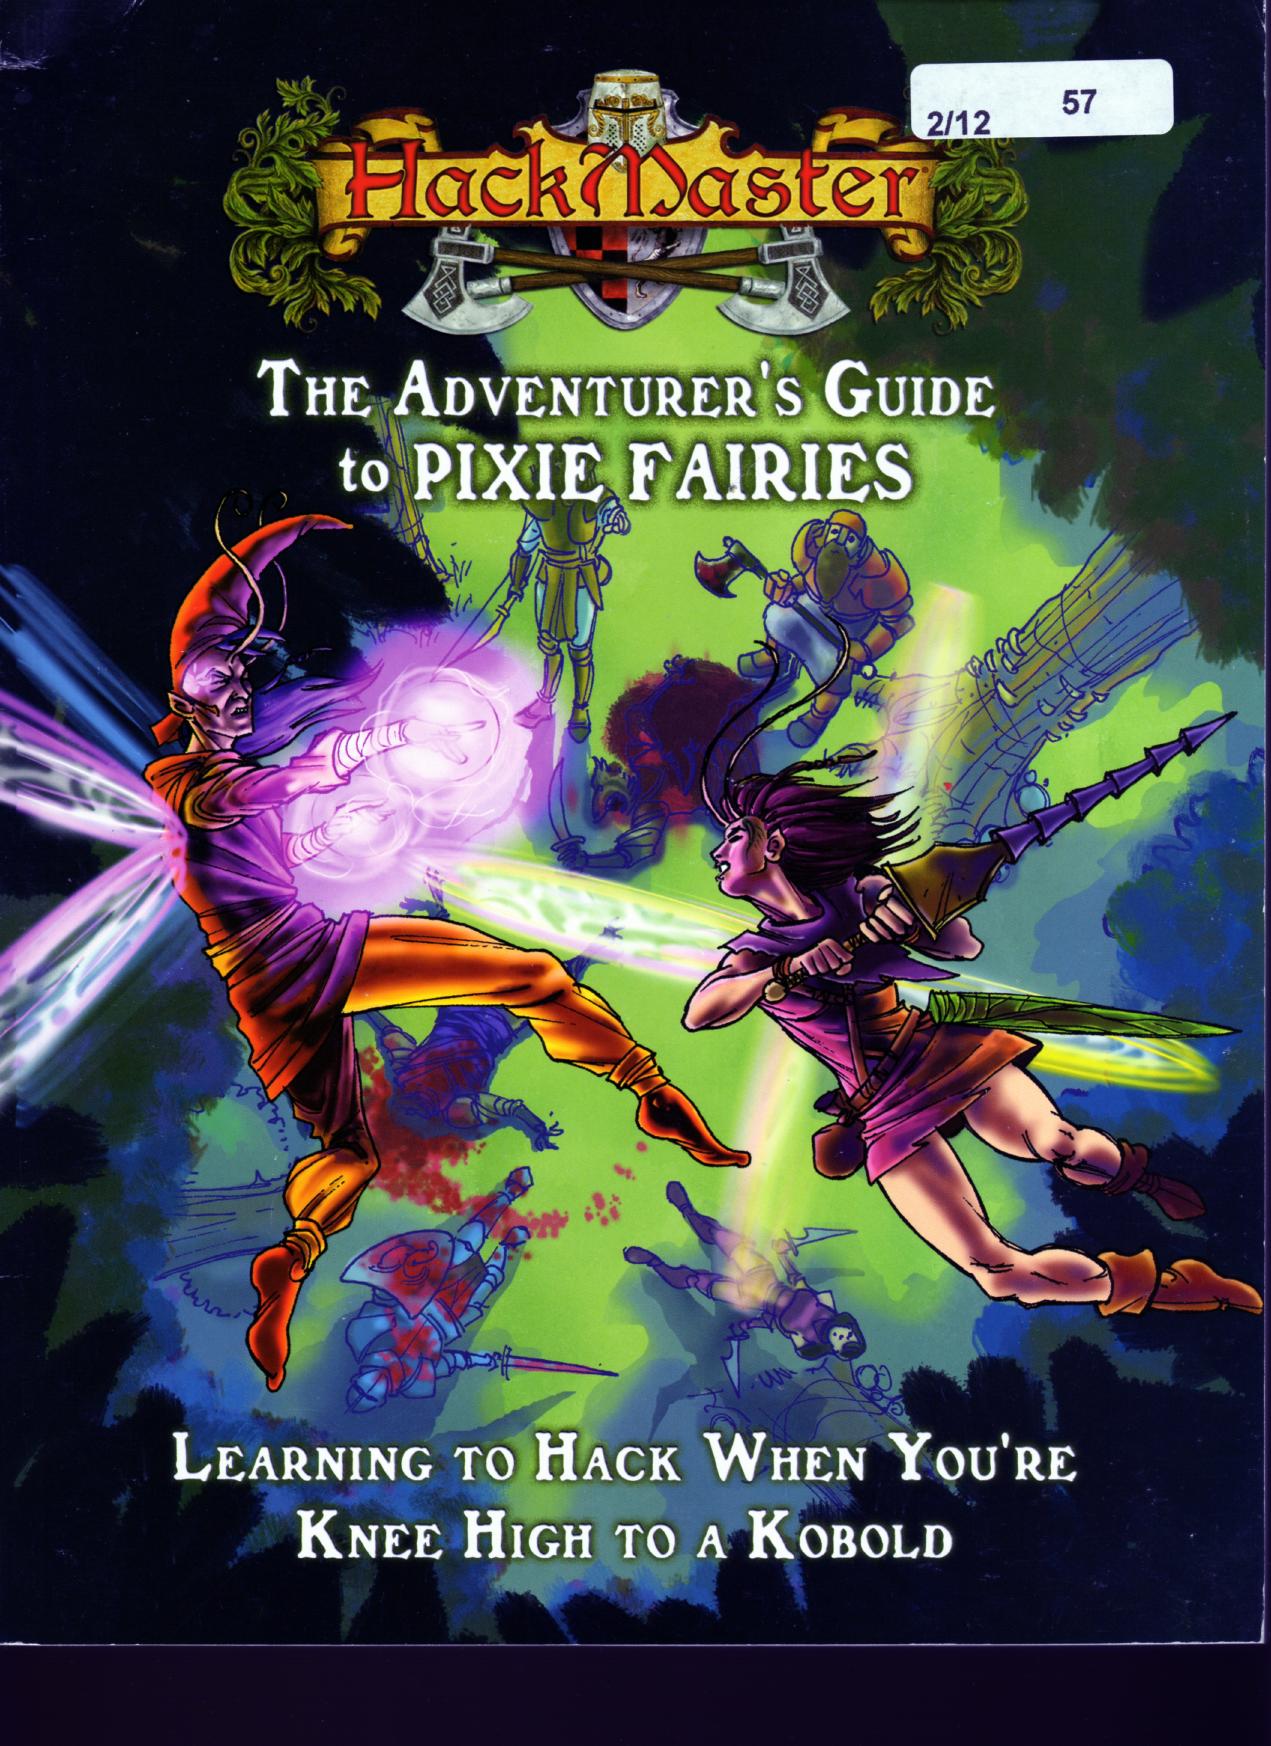 The Adventurer's Guide To Pixie Fairies